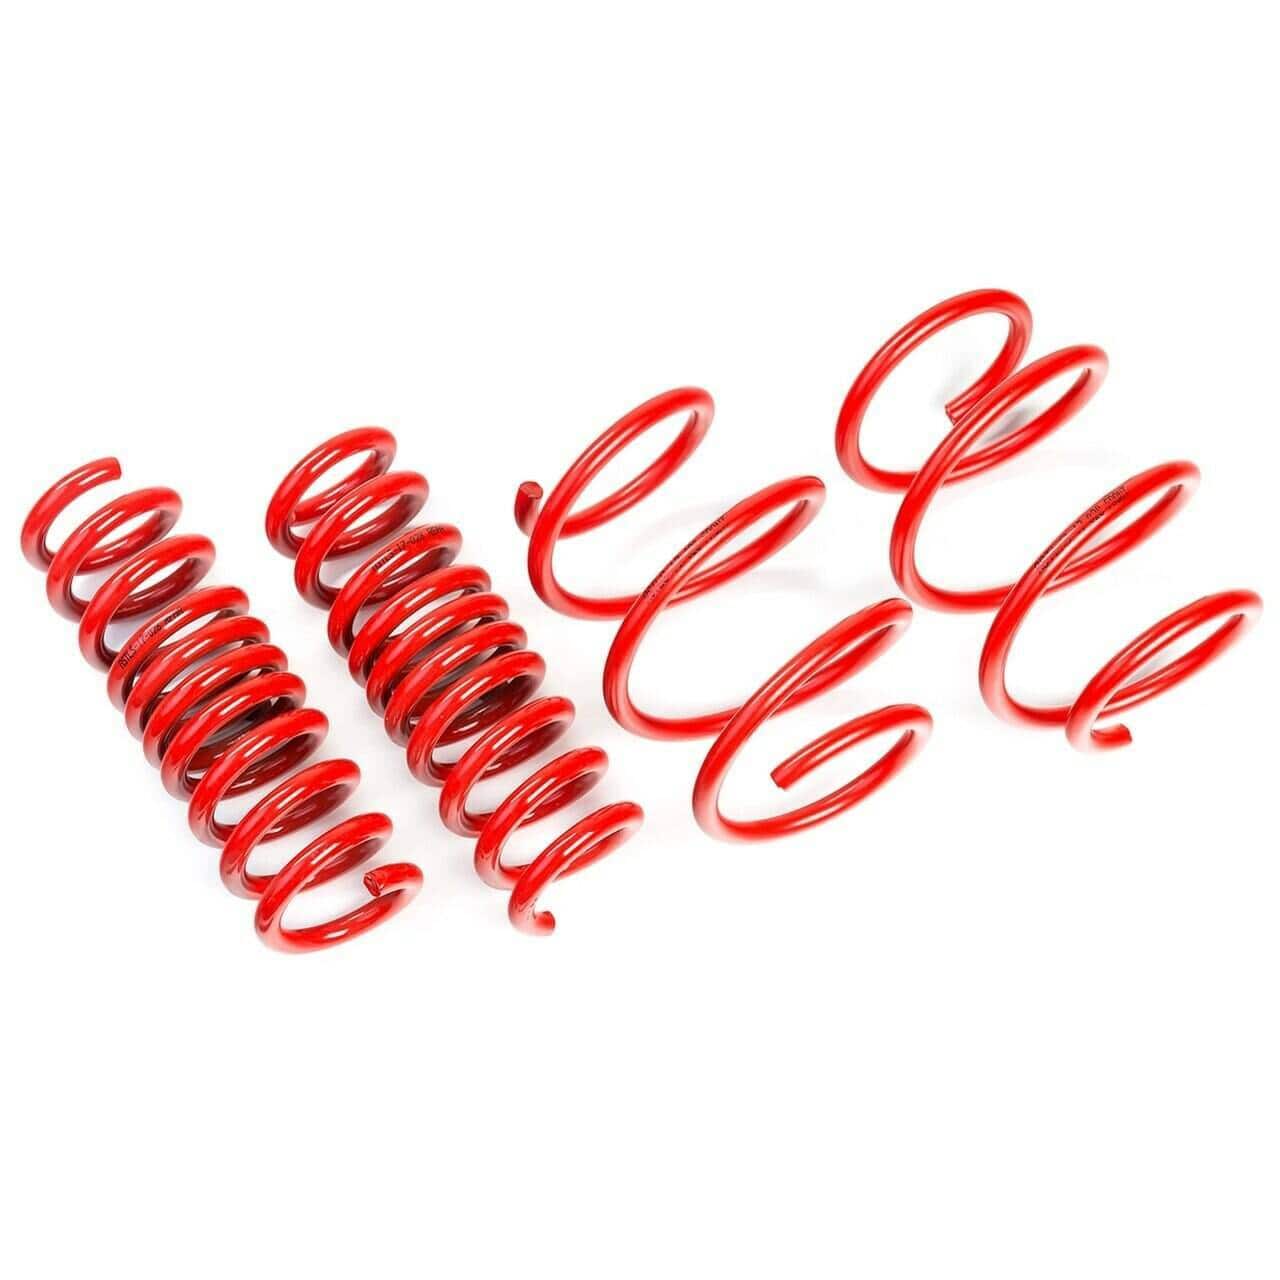 AST Suspension Lowering Springs (25MM/25MM) - 2012+ BMW 2 Series 228/230/218D/220D Coupe (F22) ASTLS-18-057